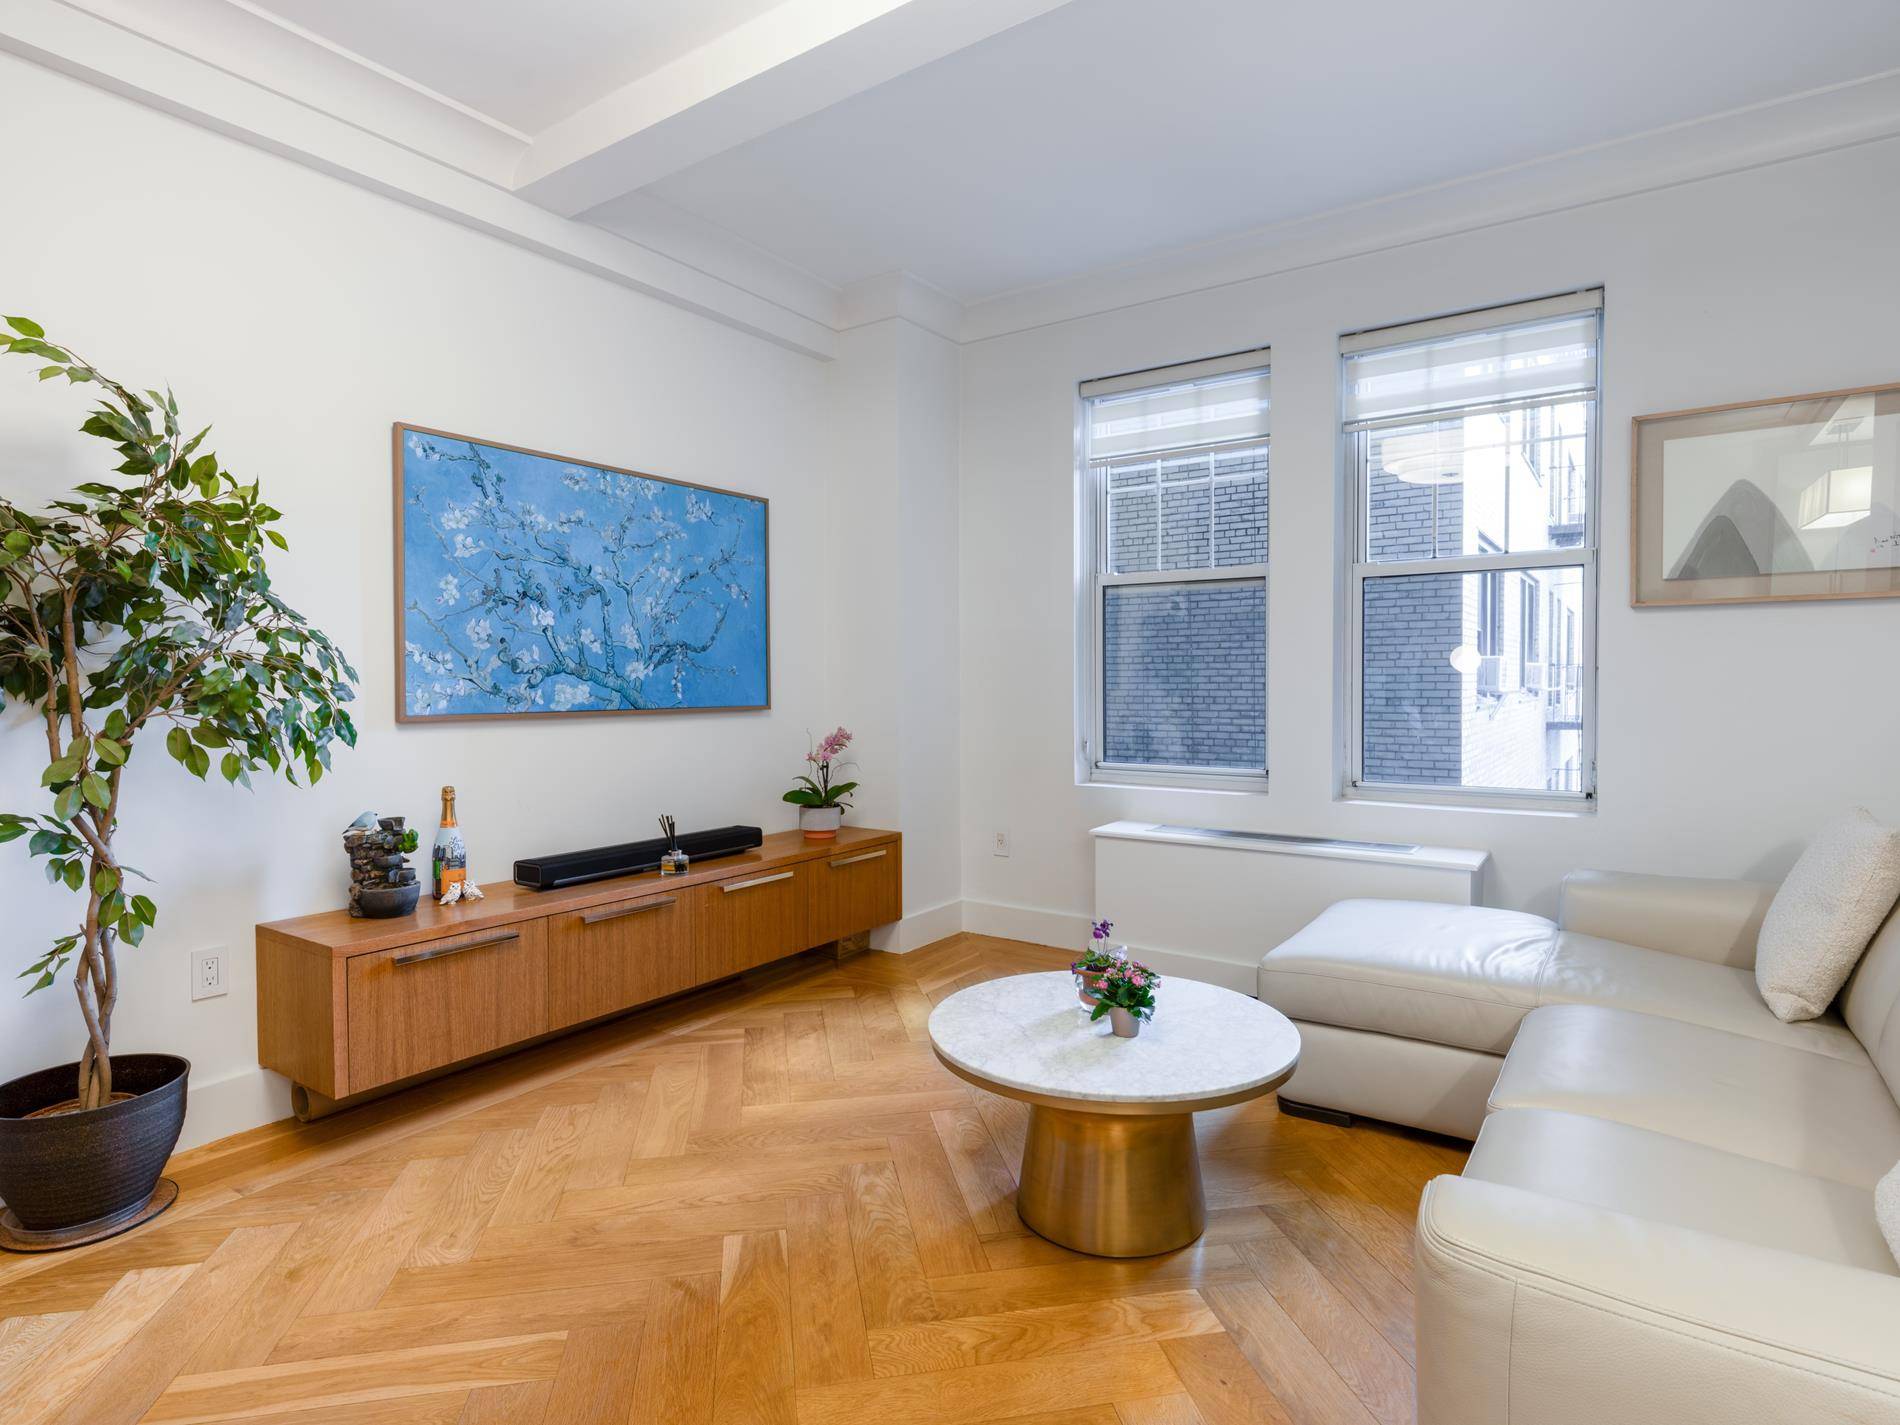 Renovated and reimagined 1 Bedroom for sale at the desirable Olcott Condominium.